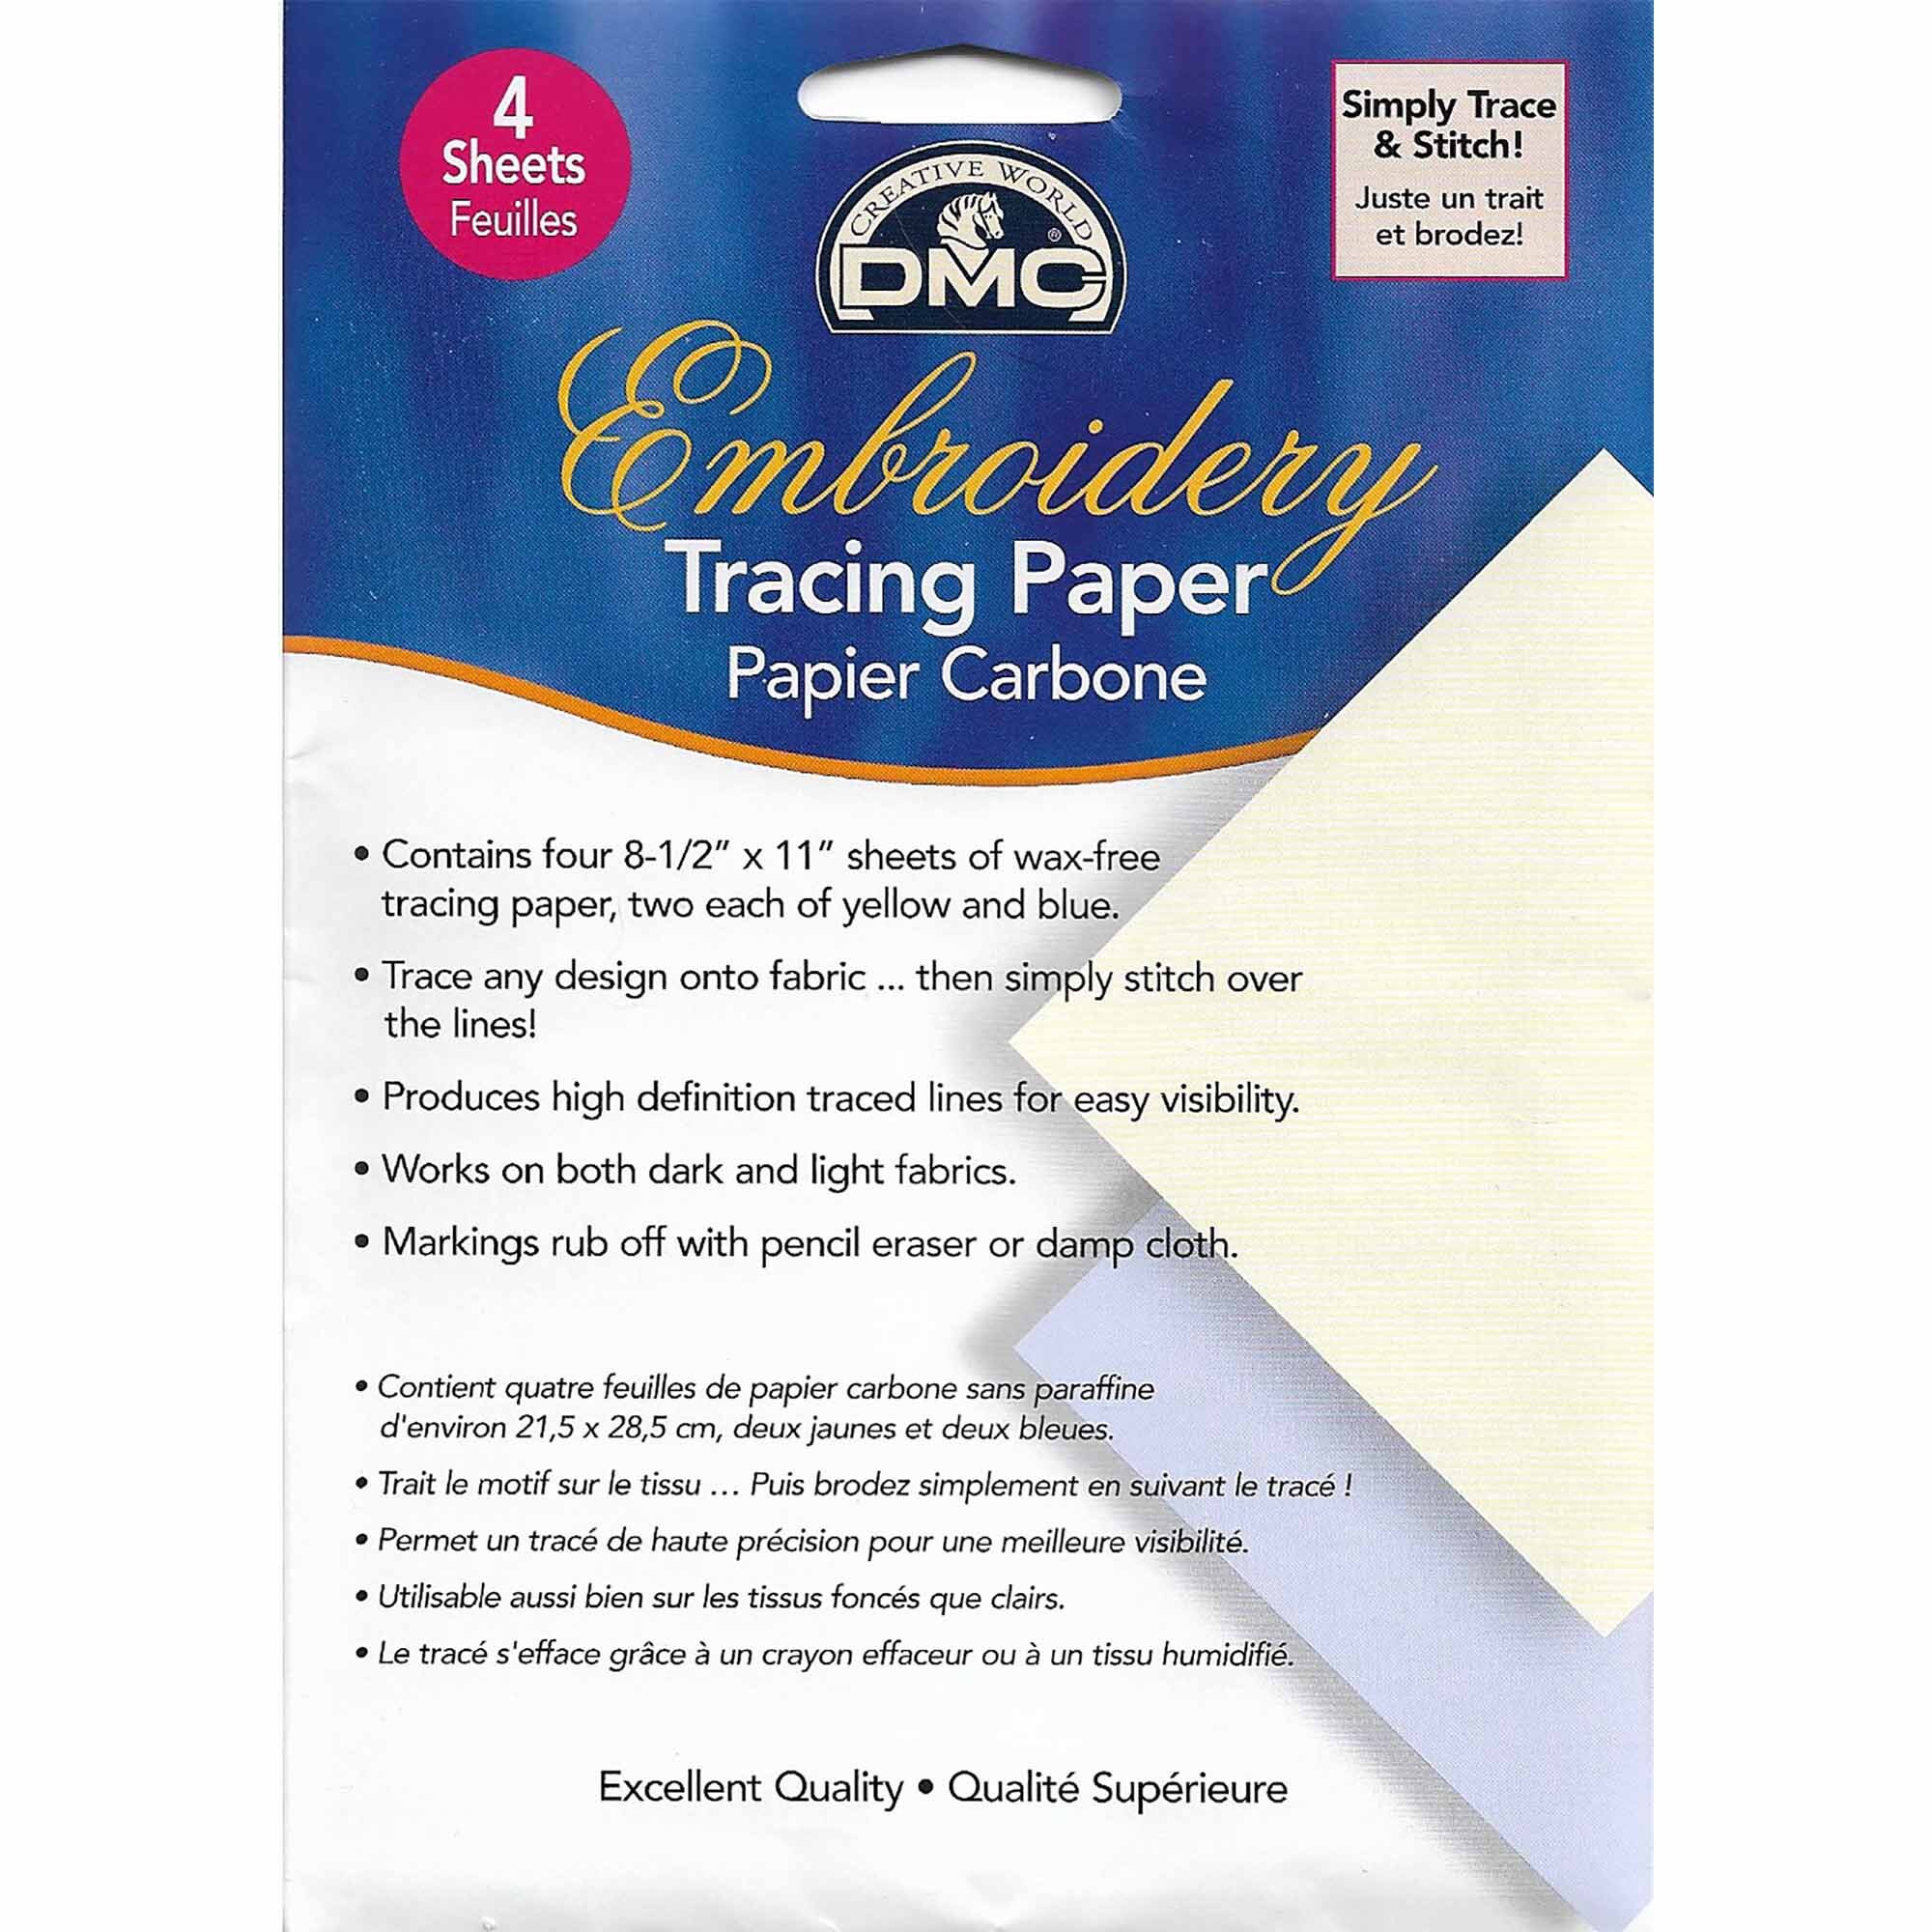 UNIQUE SEWING Tracing Paper Large - 66 x 82cm (26 x 32½) - 2 sheets